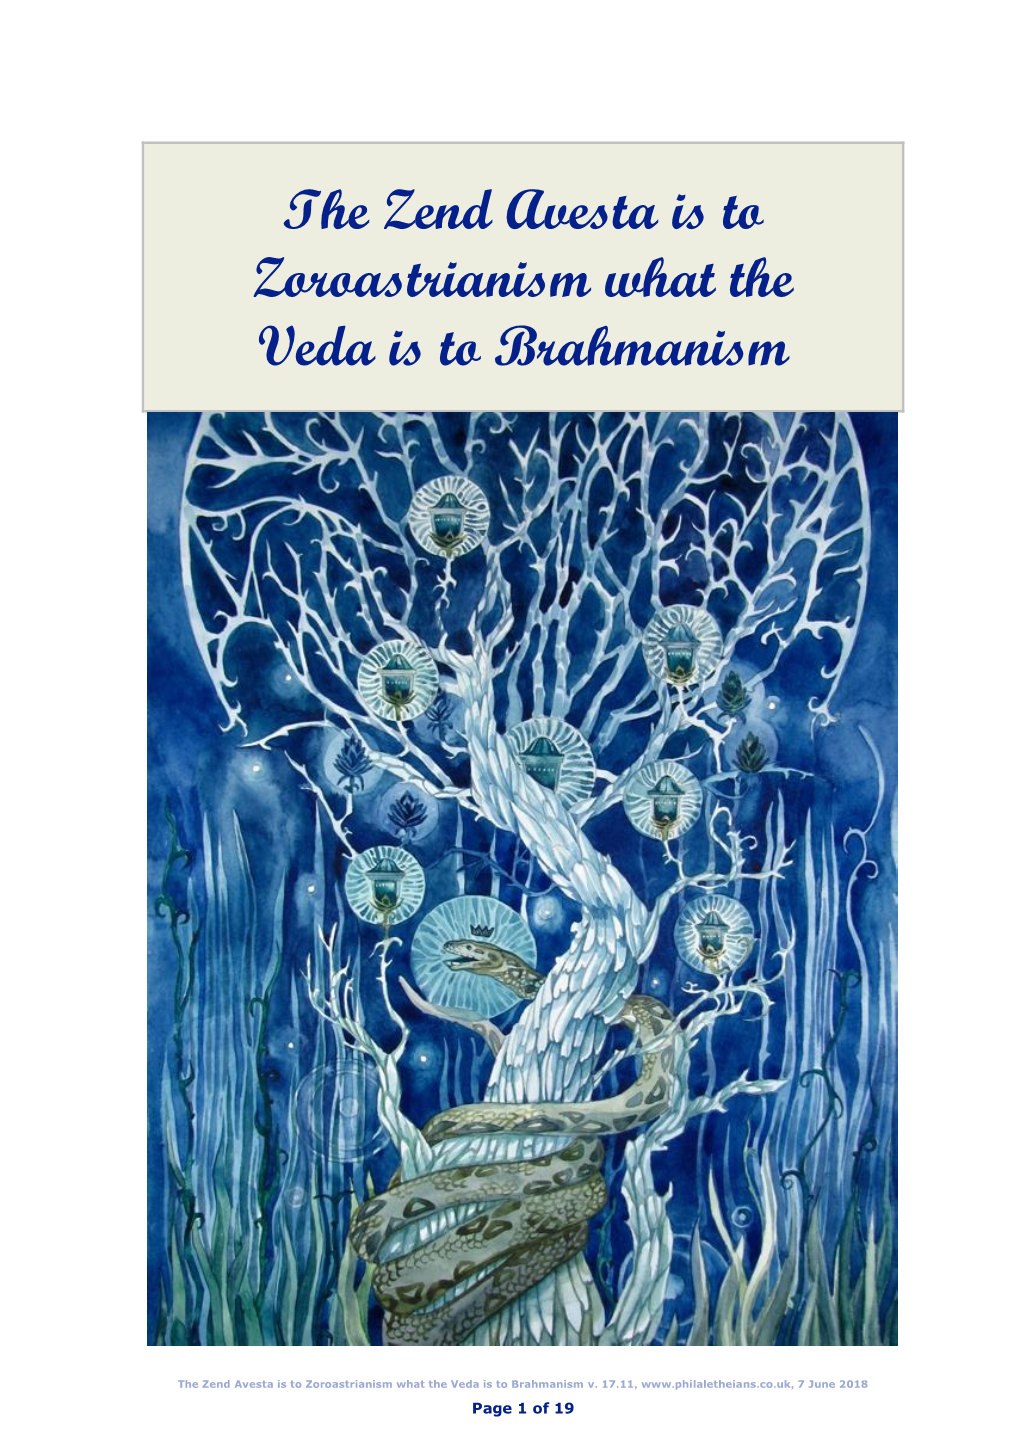 The Zend Avesta Is to Zoroastrianism What the Veda Is to Brahmanism